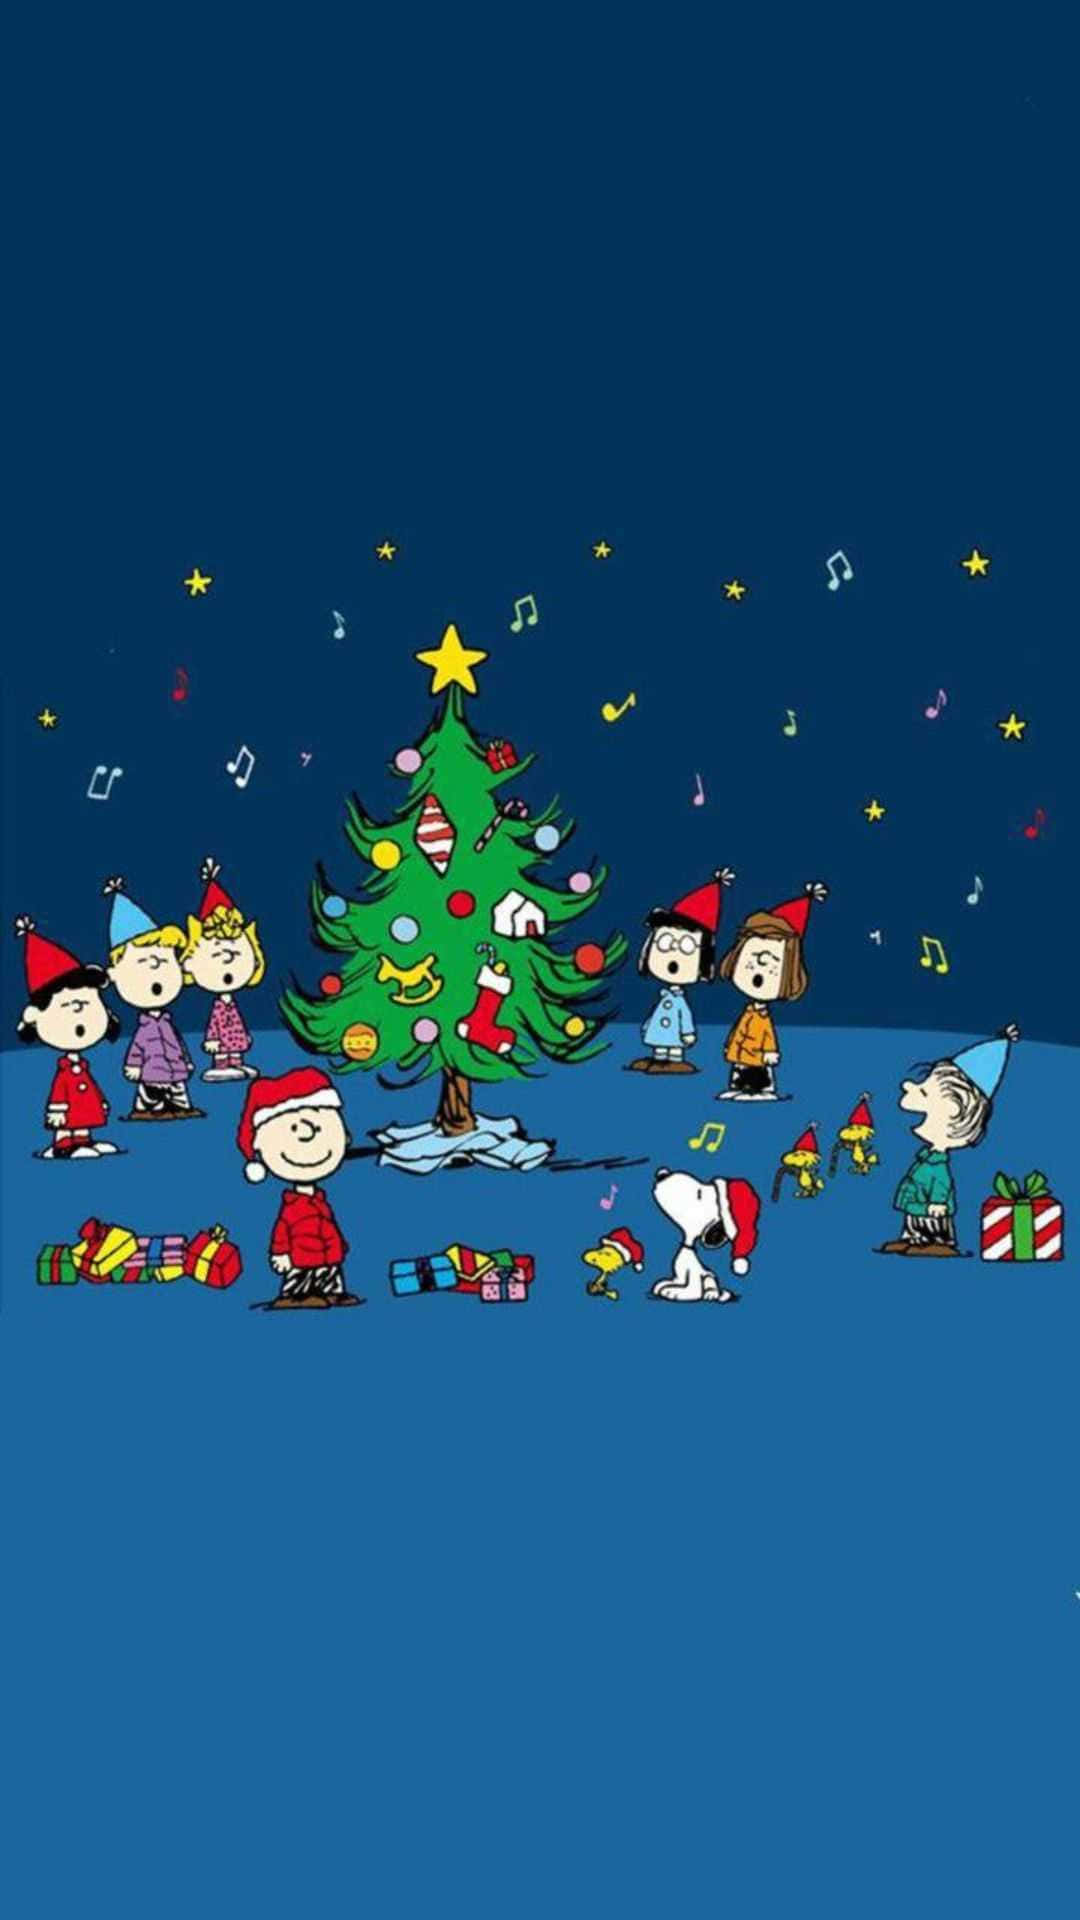 Peanuts Characters Surrounds Christmas Tree Wallpaper